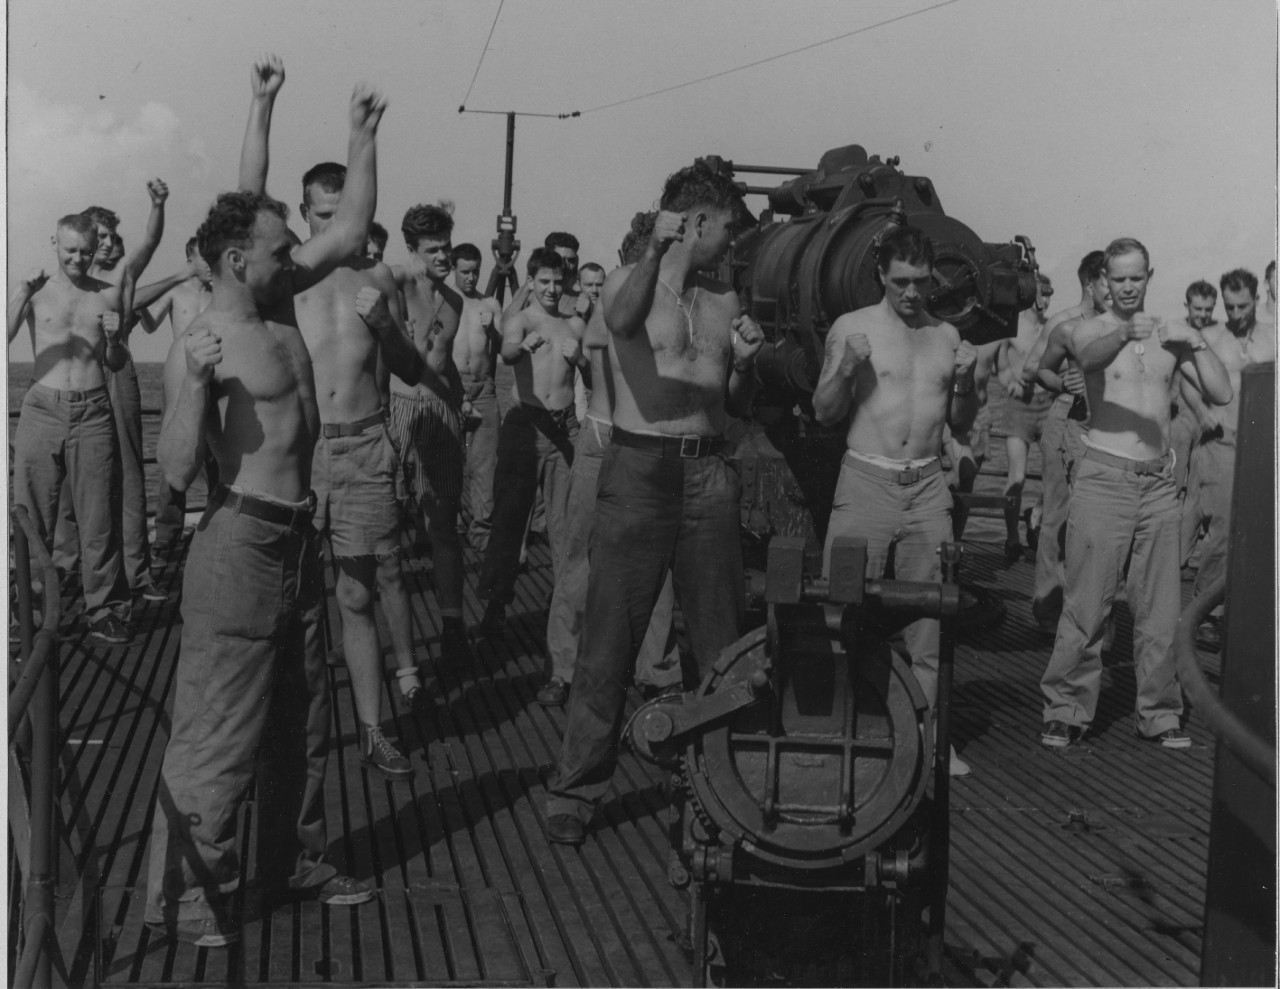 Marine raiders, probably welcoming the chance to be out in fresh air, limber up topside around Nautilus’s forward 6-inch gun during the voyage to the Gilberts, 11 August 1942. Note the tattoed Leatherneck working out to right of center. Sadly, no...